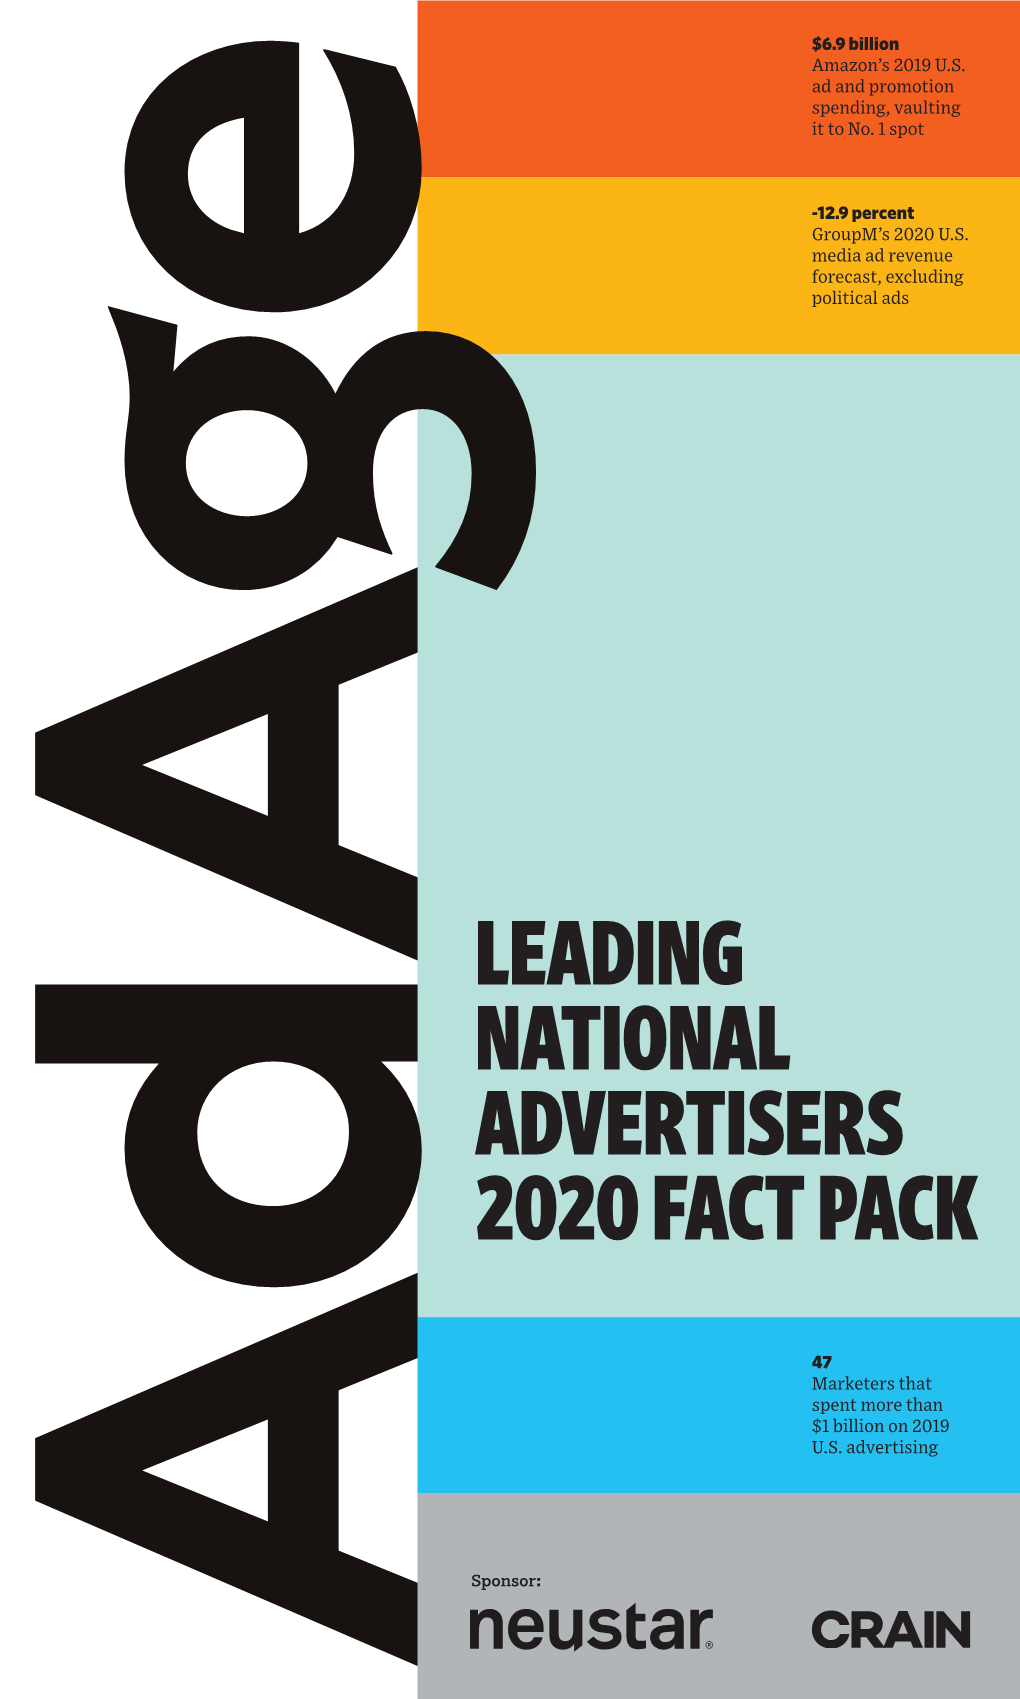 Leading National Advertisers 2020 Fact Pack